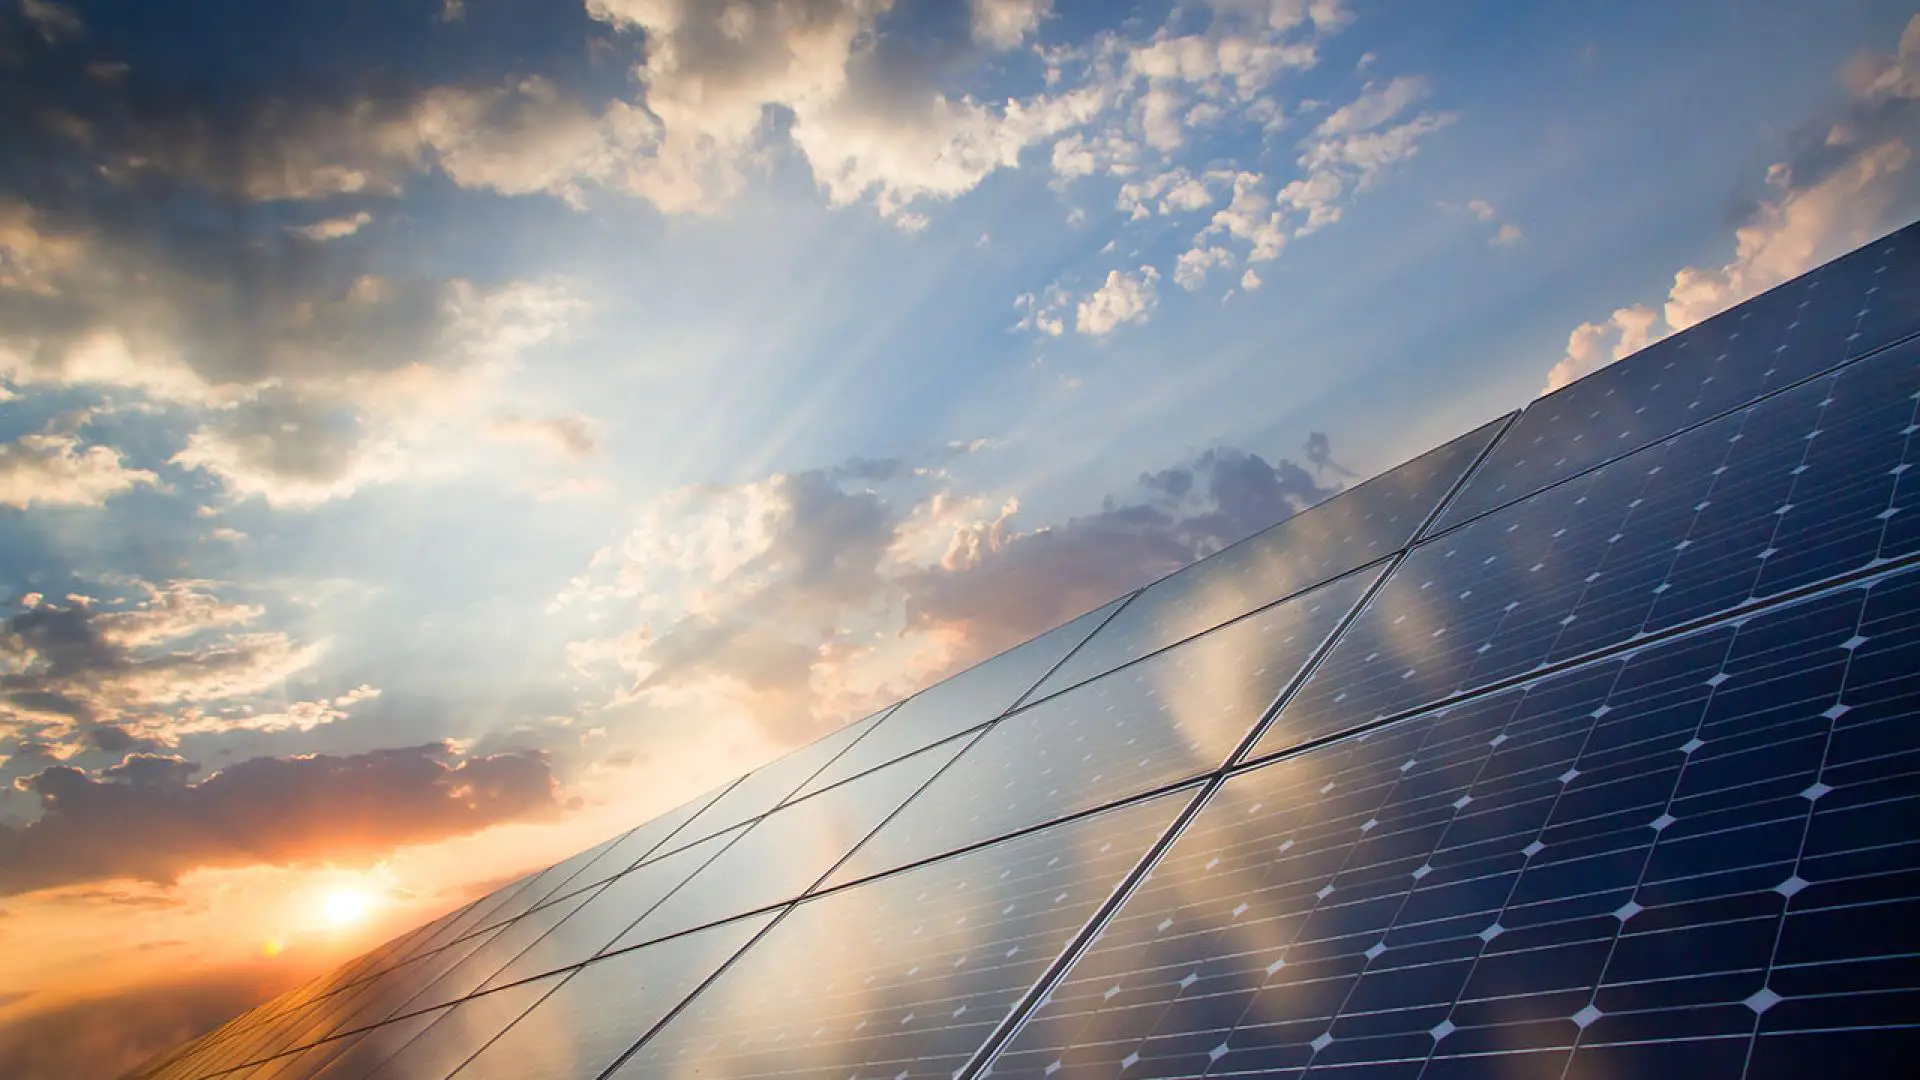 Can You Store Energy From Solar Panels?